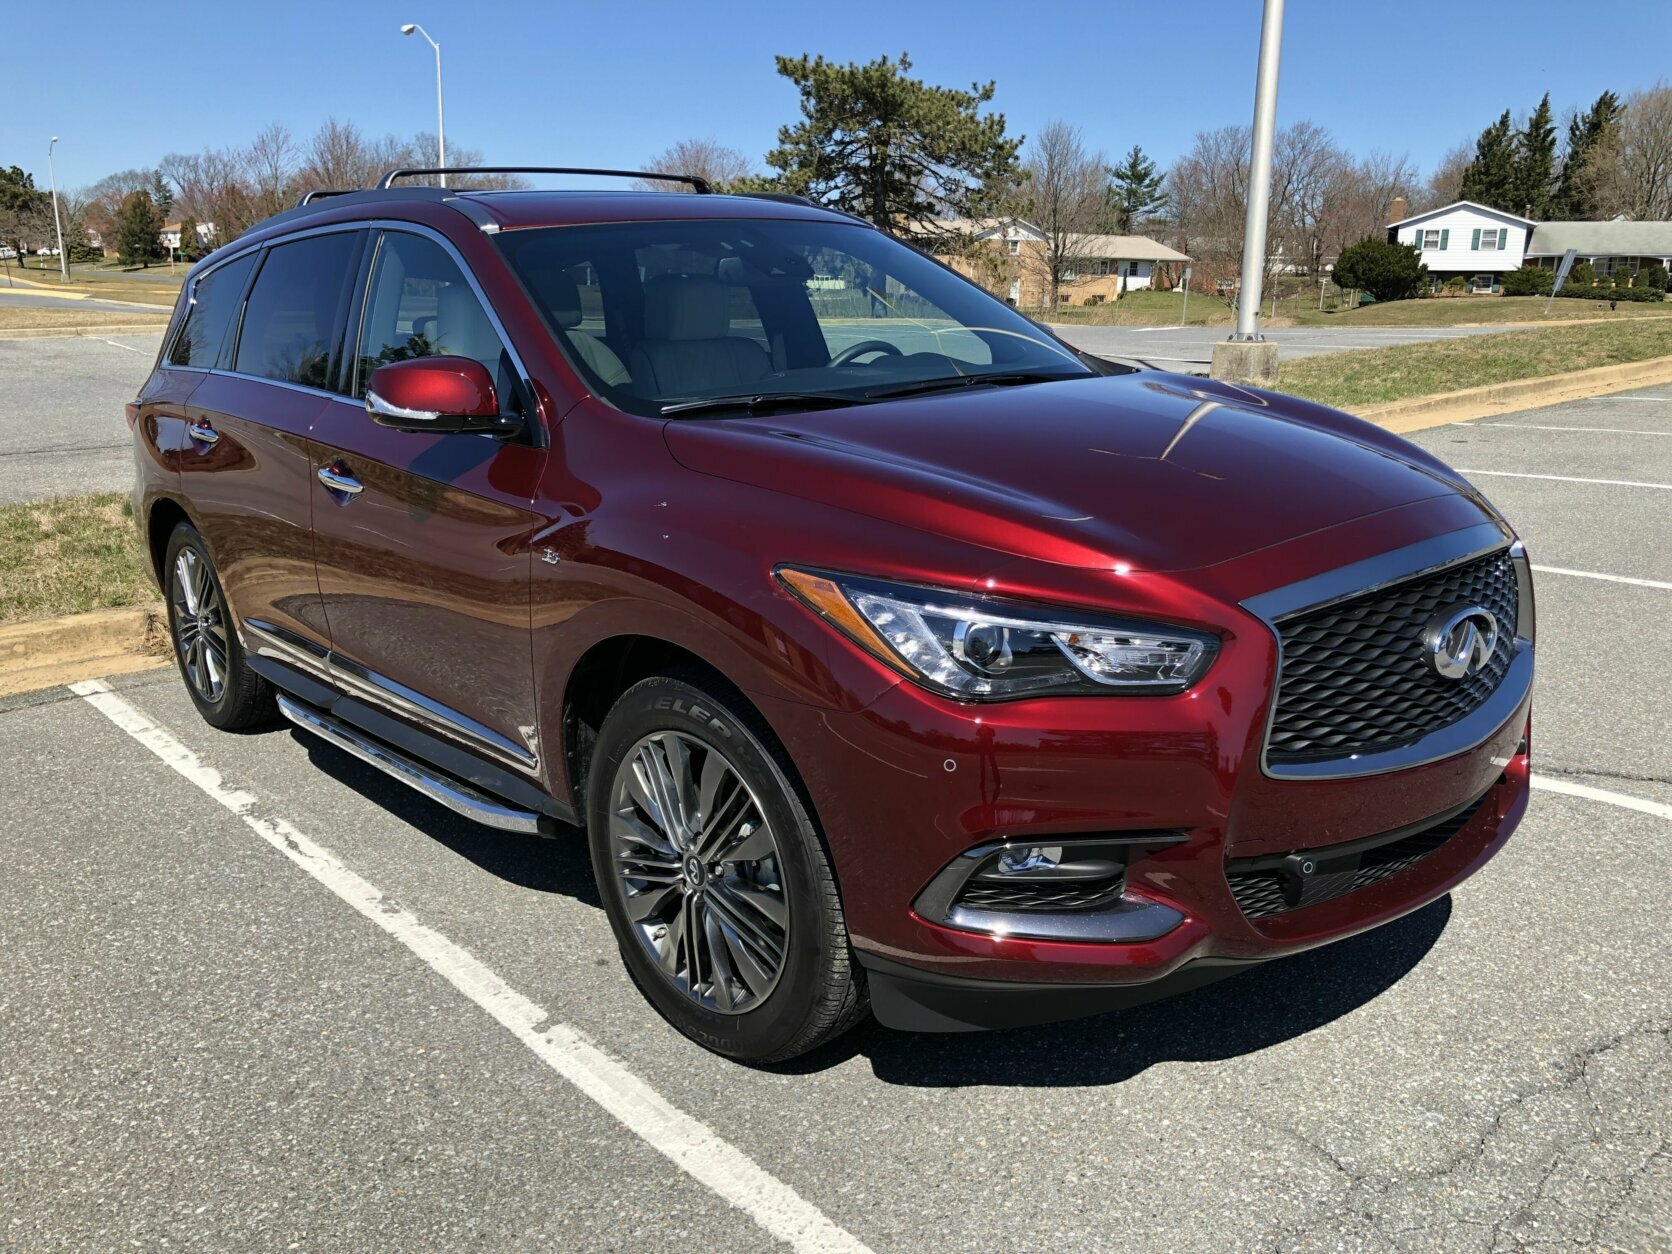 <p><strong>2019 Infiniti QX60 Luxe</strong></p>
<p><strong>Price:</strong> $65,930 as driven</p>
<p>While prices start in the mid-40s, ours cost significantly more.</p>
